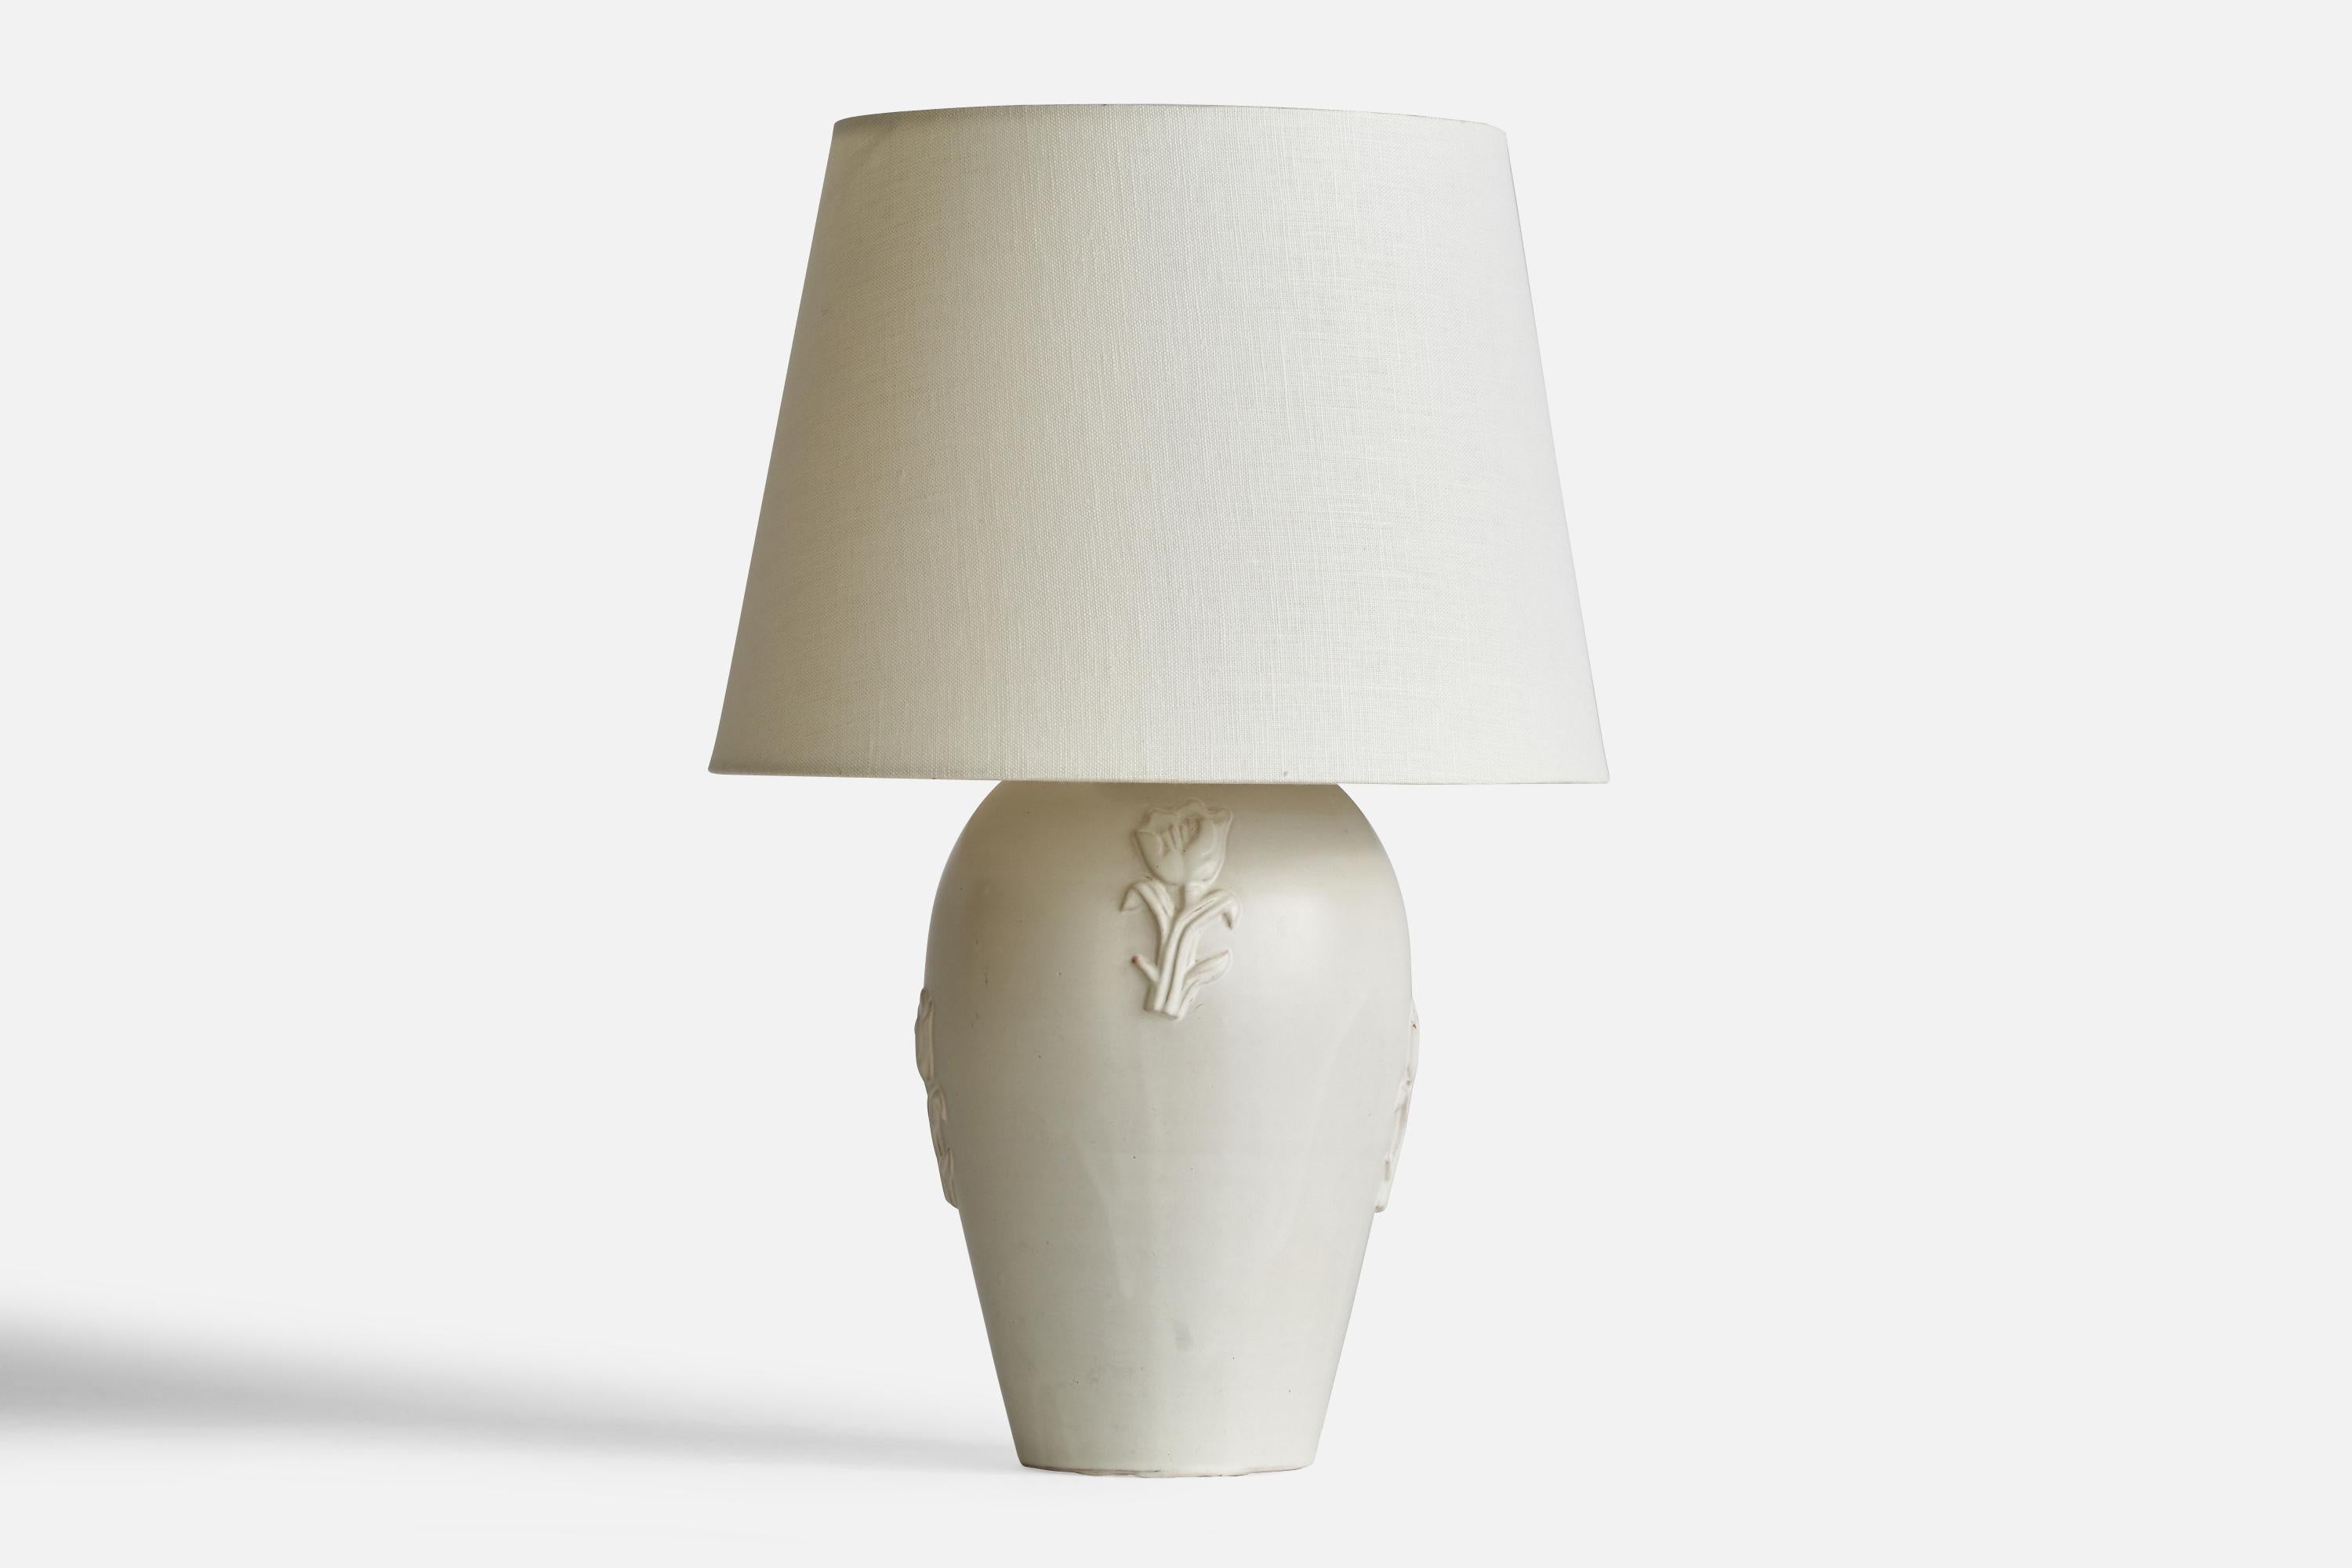 A white-glazed ceramic table lamp designed by Jerk Werkmäster and produced by Nittsjö, Sweden, 1930s.

Dimensions of Lamp (inches): 12.1” H x 6.35” Diameter
Dimensions of Shade (inches): 9” Top Diameter x 12” Bottom Diameter x 9” H
Dimensions of